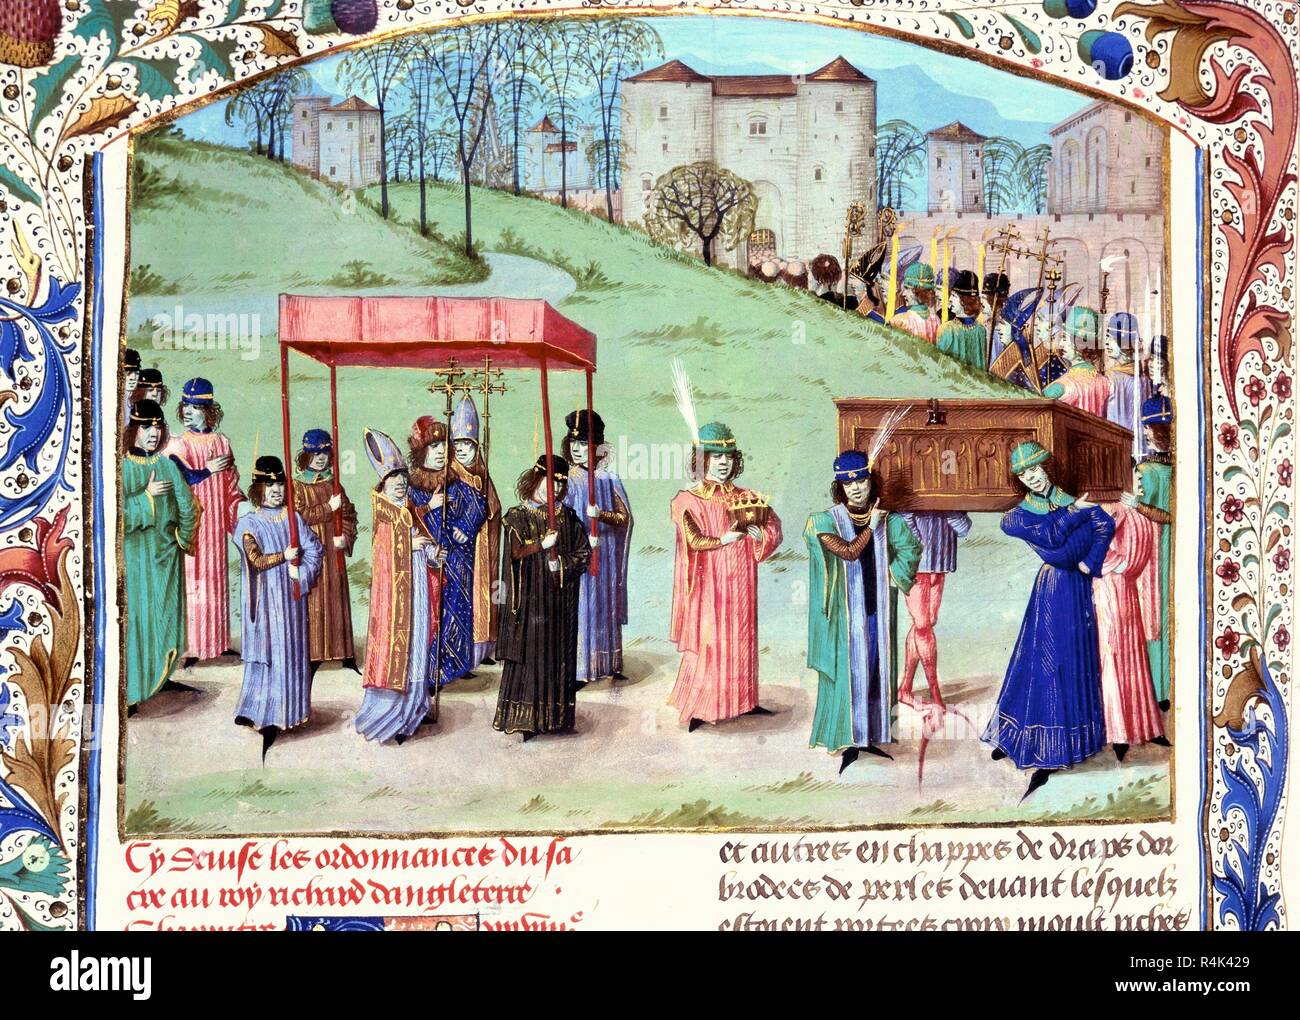 Coronation procession of King Richard I (1157-99) of England with barons of Conque Ports from Chronicles of England. Museum: BRITISH LIBRARY. Author: Jehan de Wavrin, chronicler. Master of the London Wavrin. Stock Photo